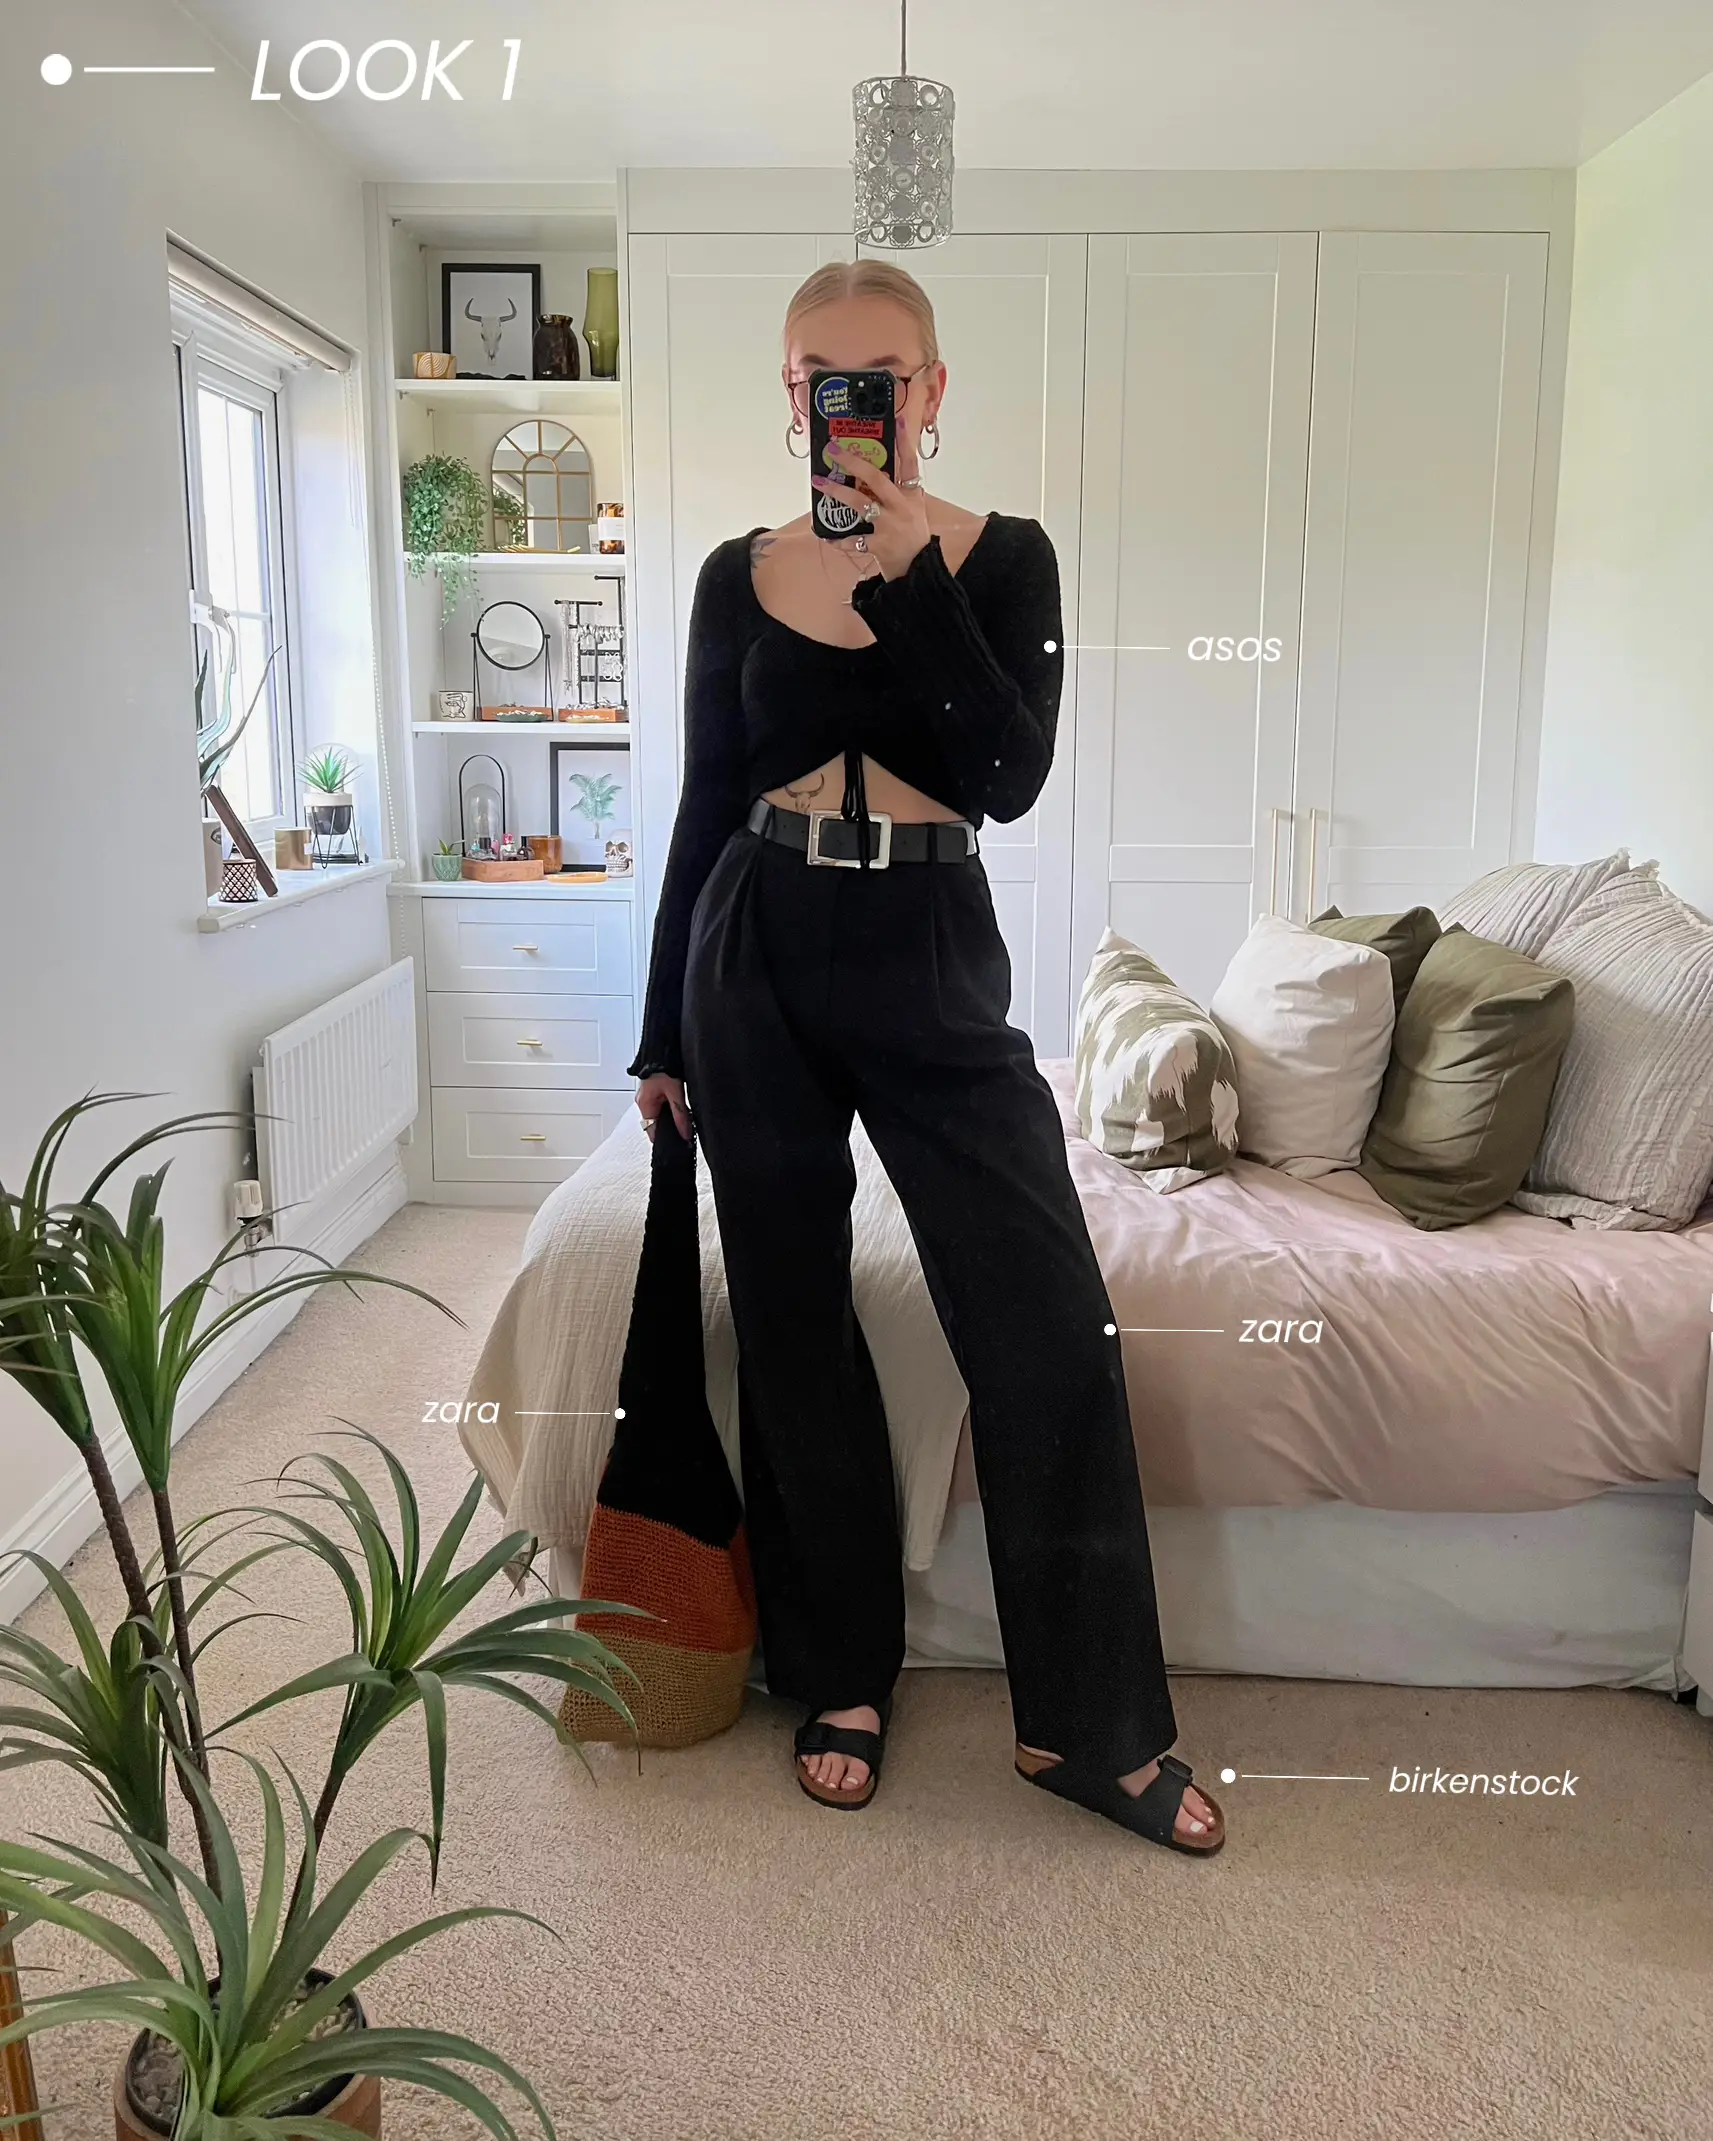 4 WAYS TO STYLE WIDE LEG TROUSERS  Gallery posted by lucygeorgina